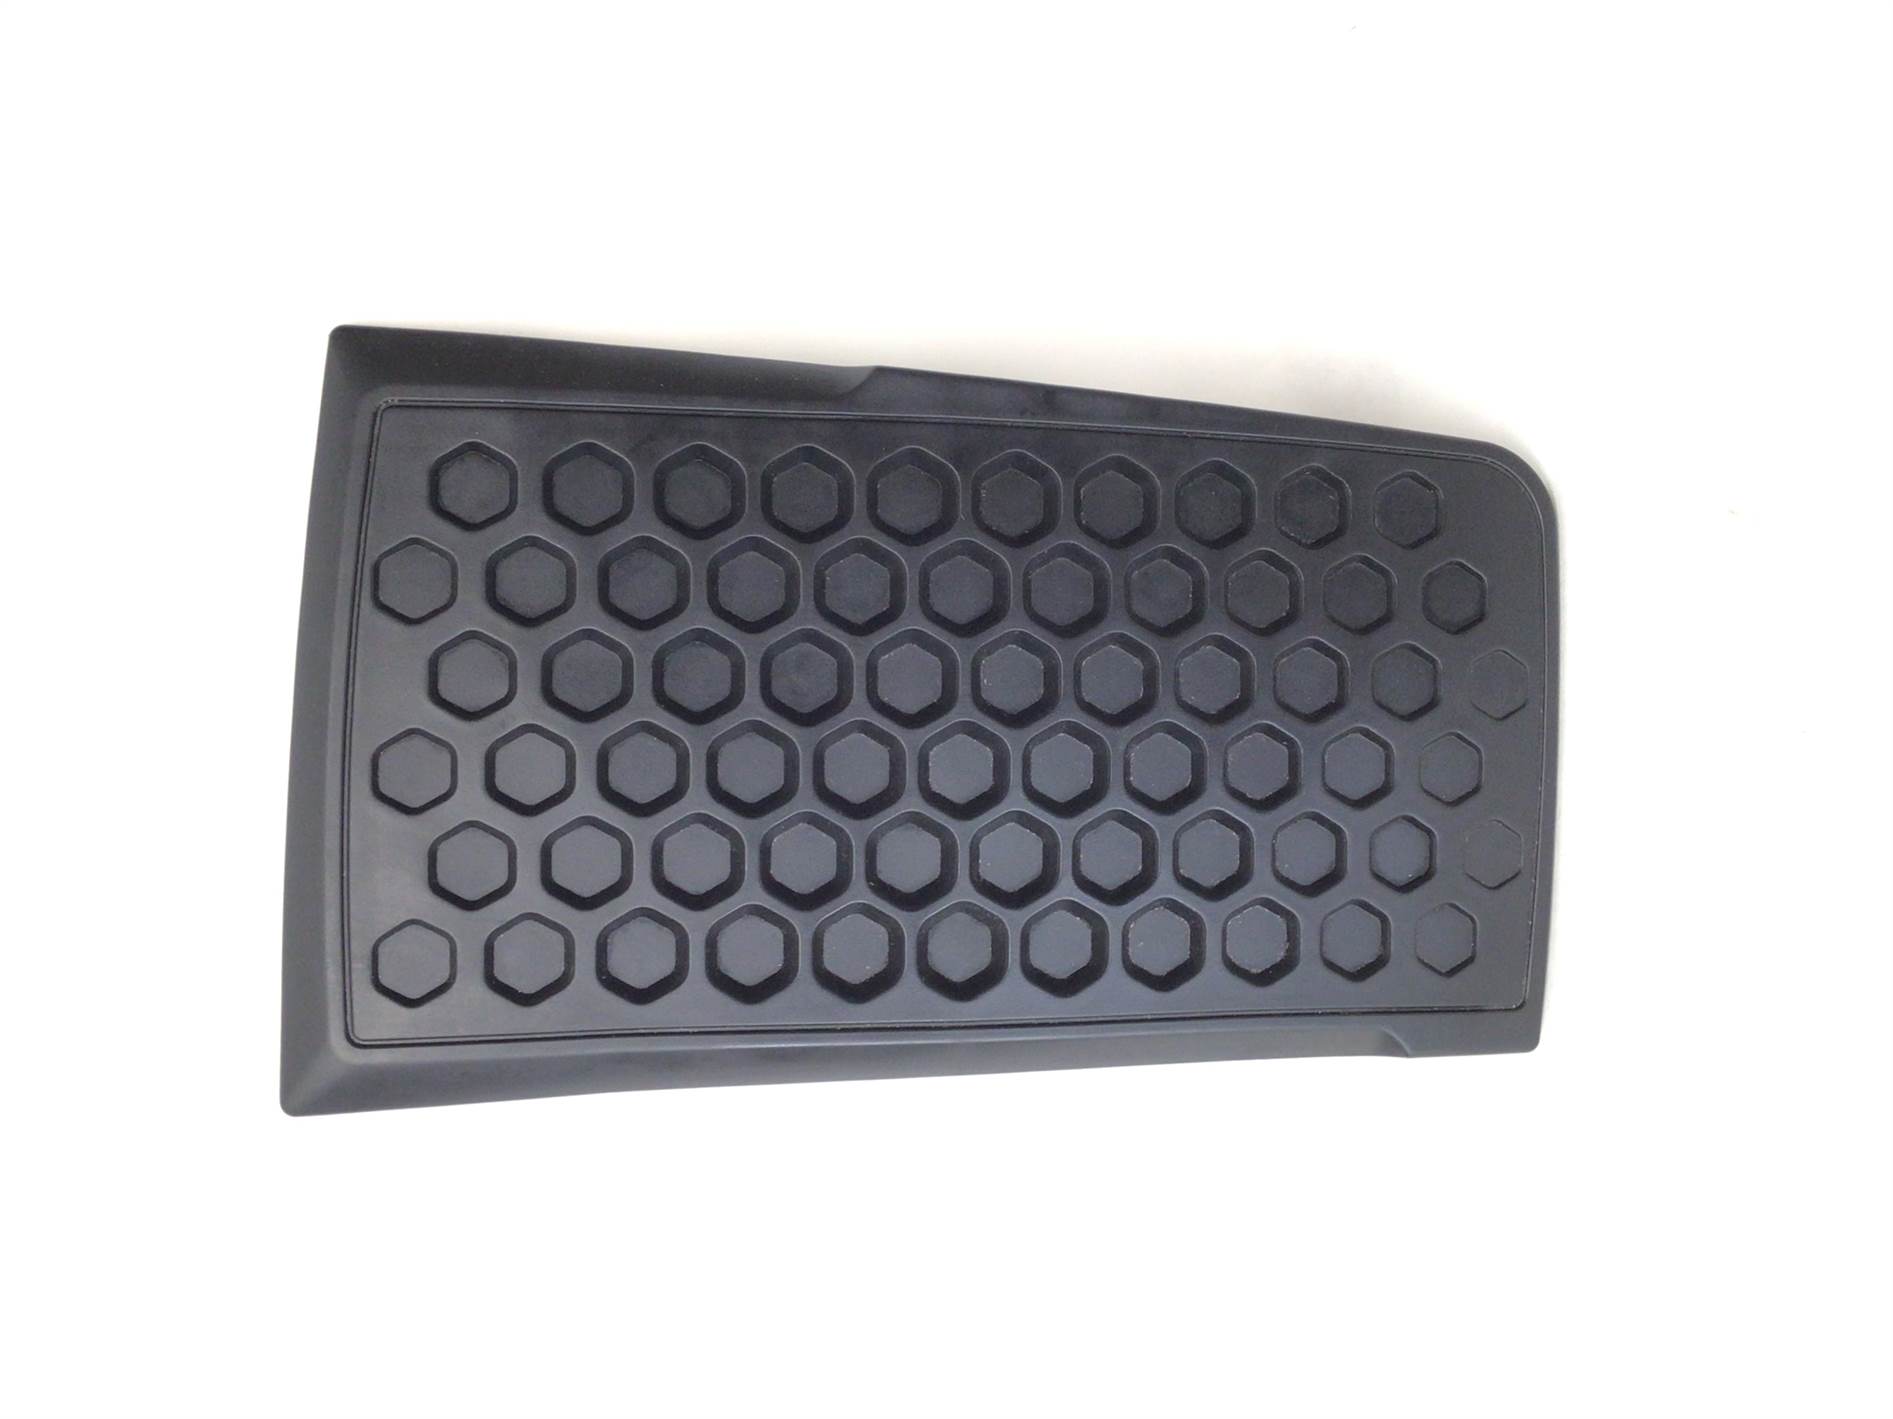 Left Foot Pad - Rubber Insert (Used)